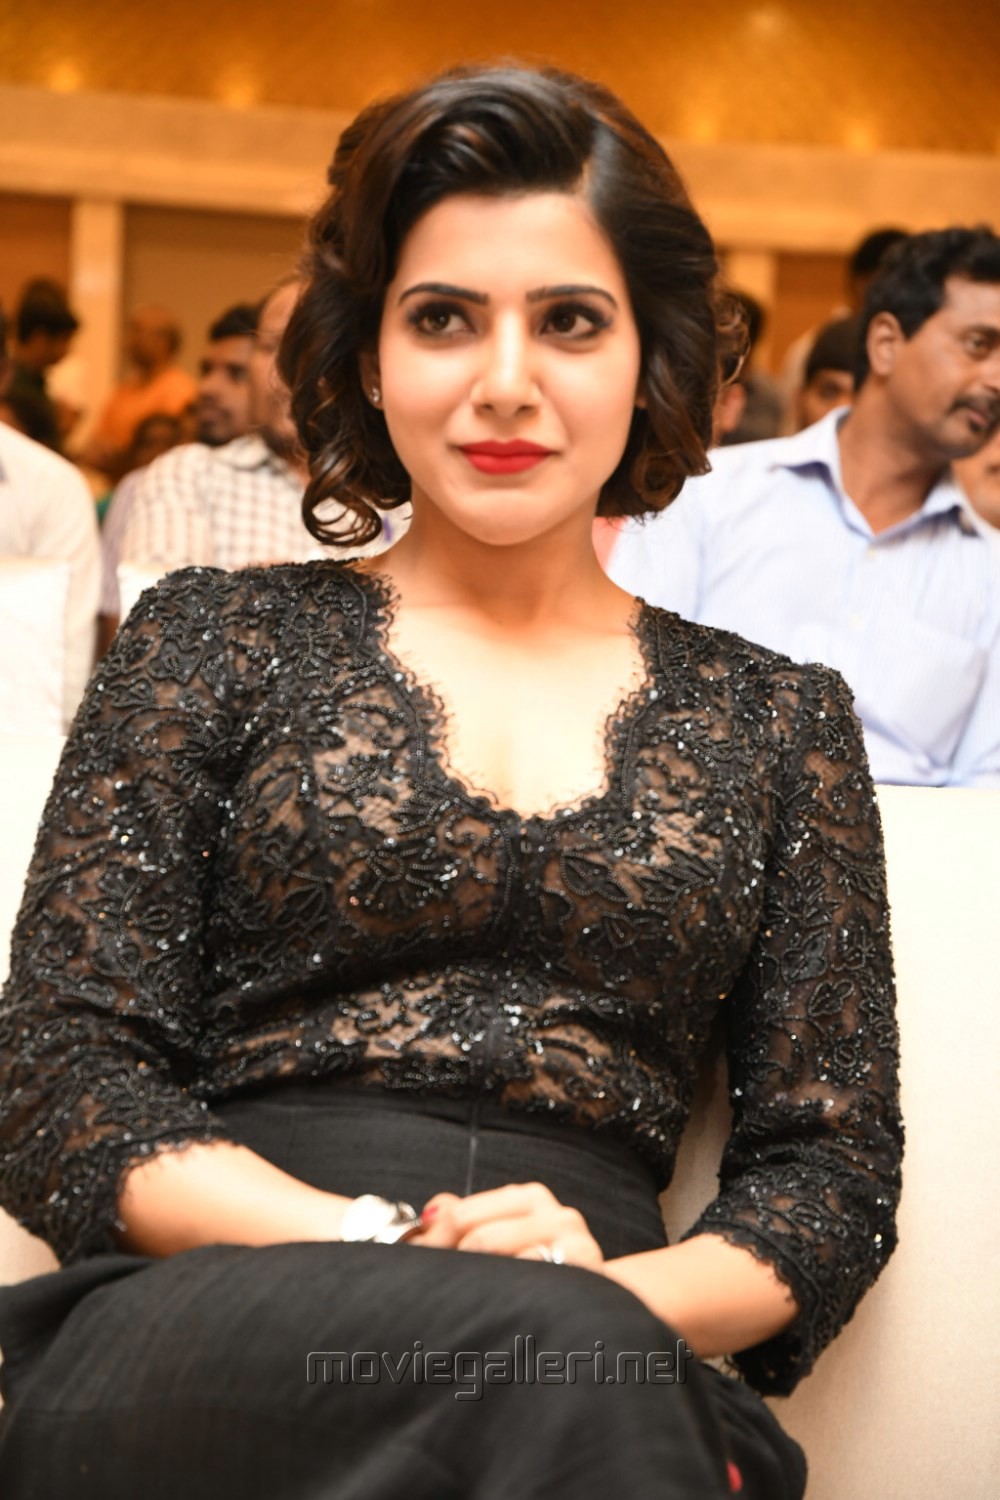 Actress Samantha Latest Pics in Black Dress | New Movie Posters